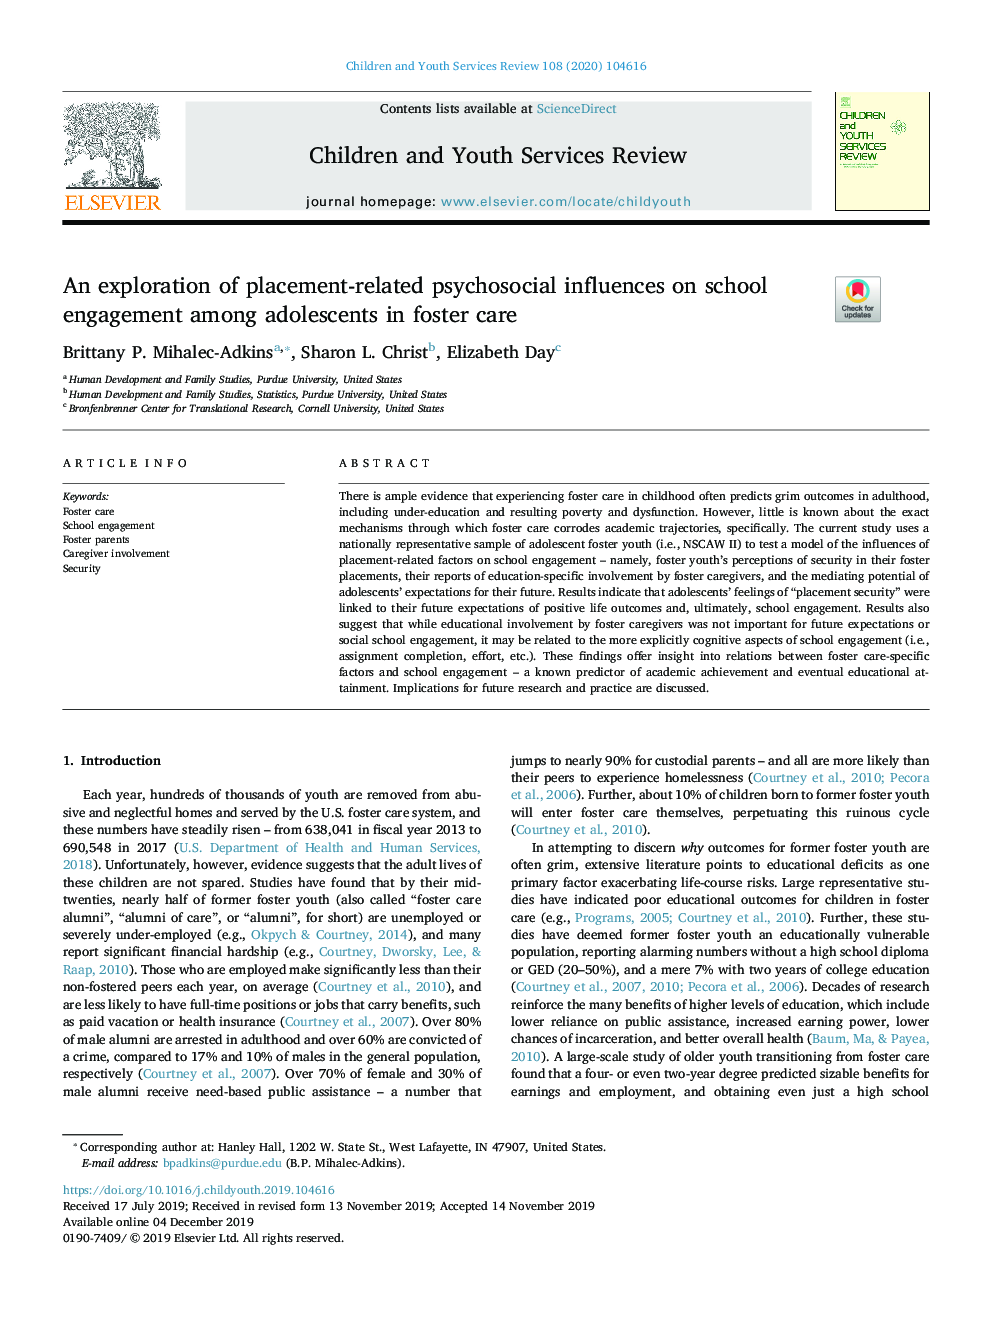 An exploration of placement-related psychosocial influences on school engagement among adolescents in foster care